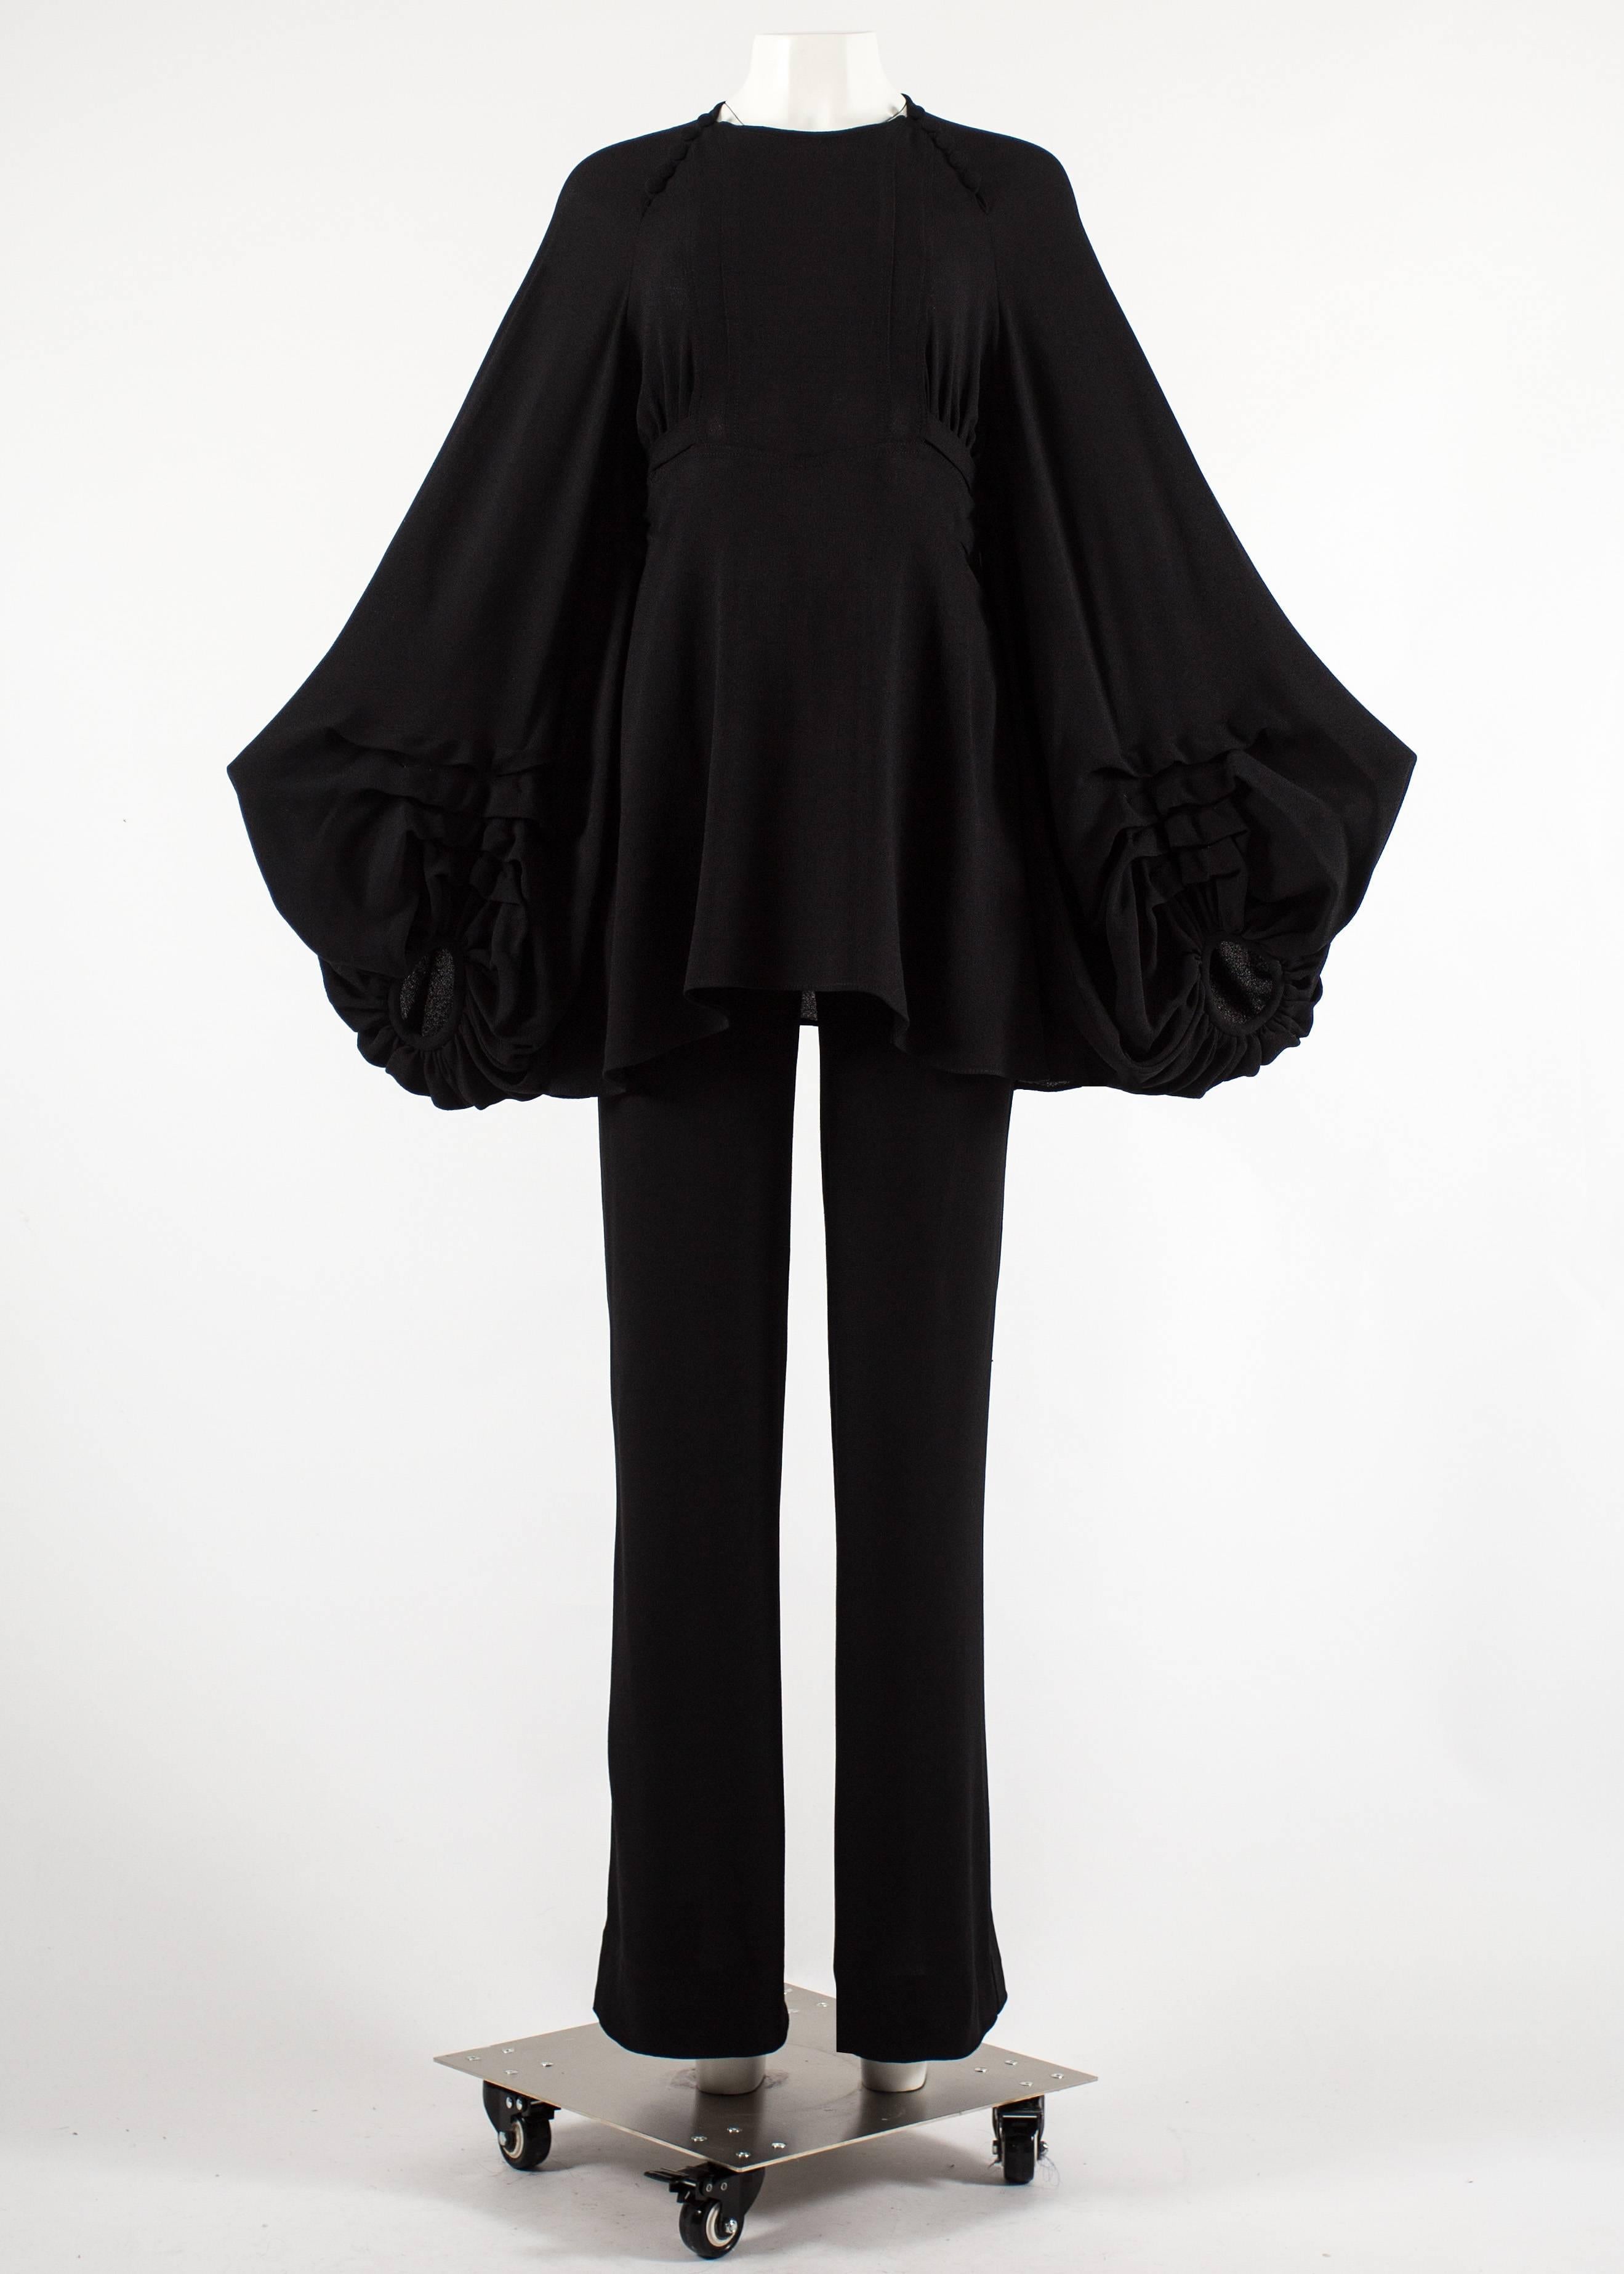 Ossie Clark 1970 black moss crepe pant suit 

- blouse with huge billowing sleeves, waist belt, button fastenings and zip closure on side seam

- high rise straight leg pants